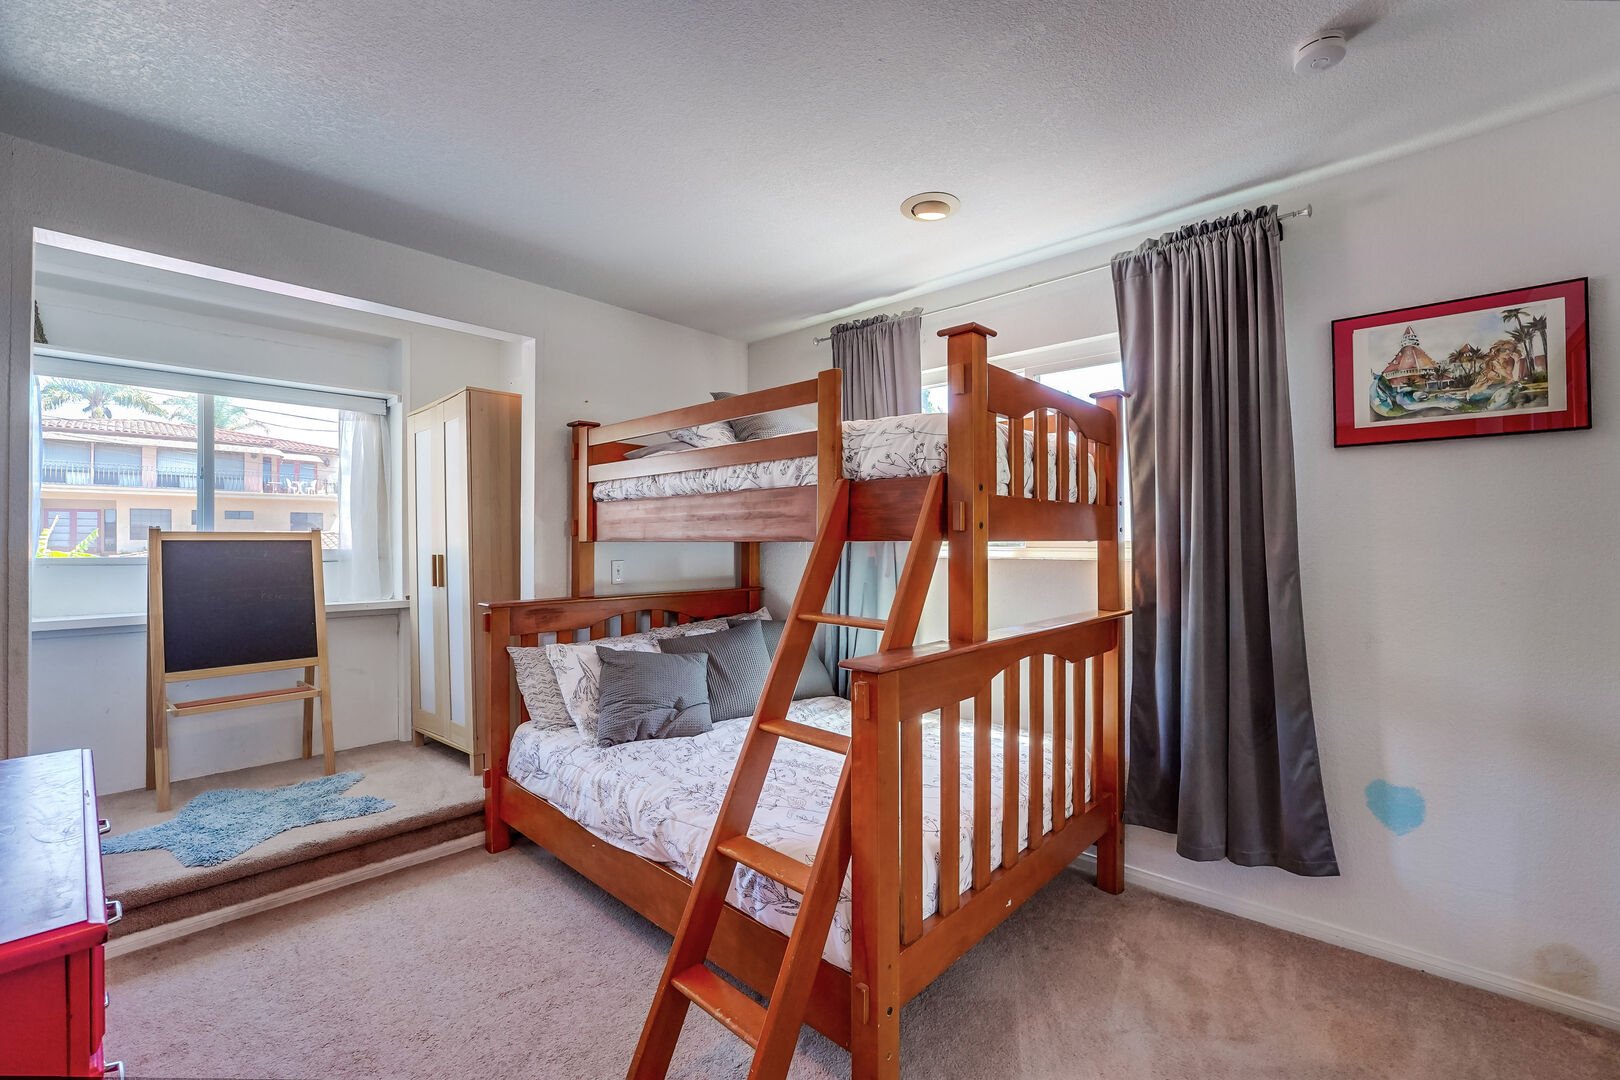 Second private guest bedroom with bunk bed with twin and full beds